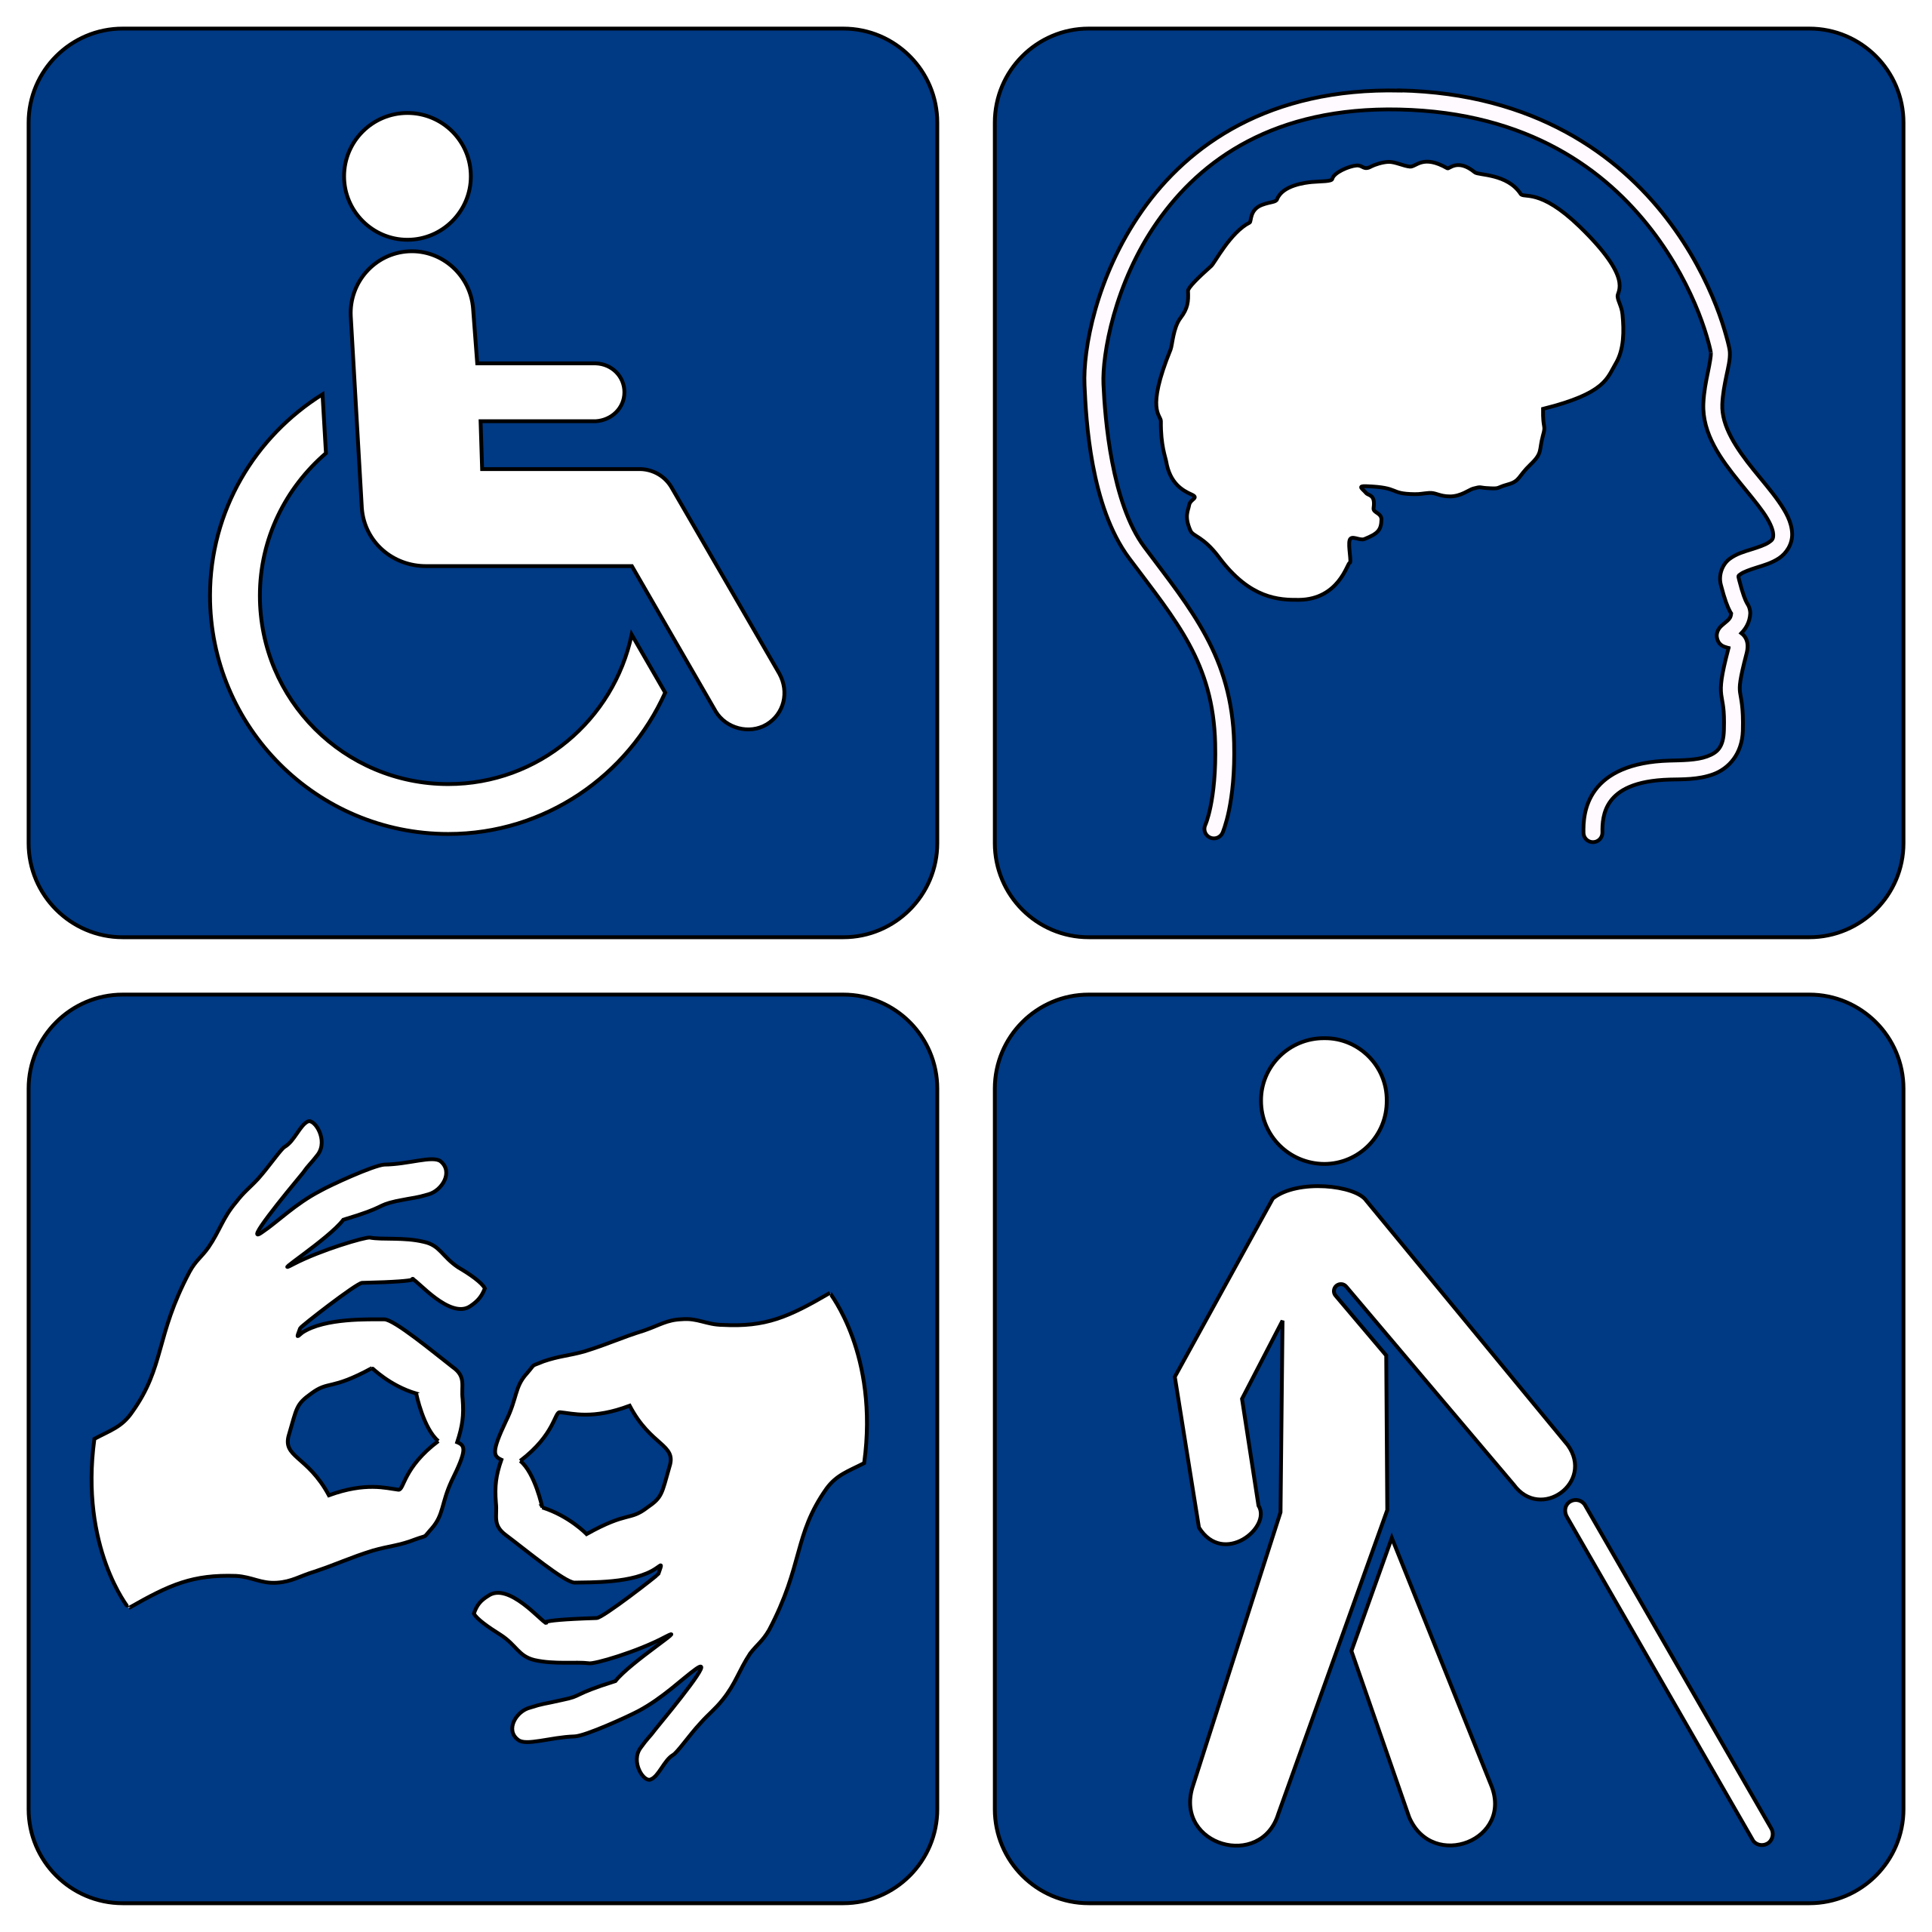 4 common pictograms depicting disability